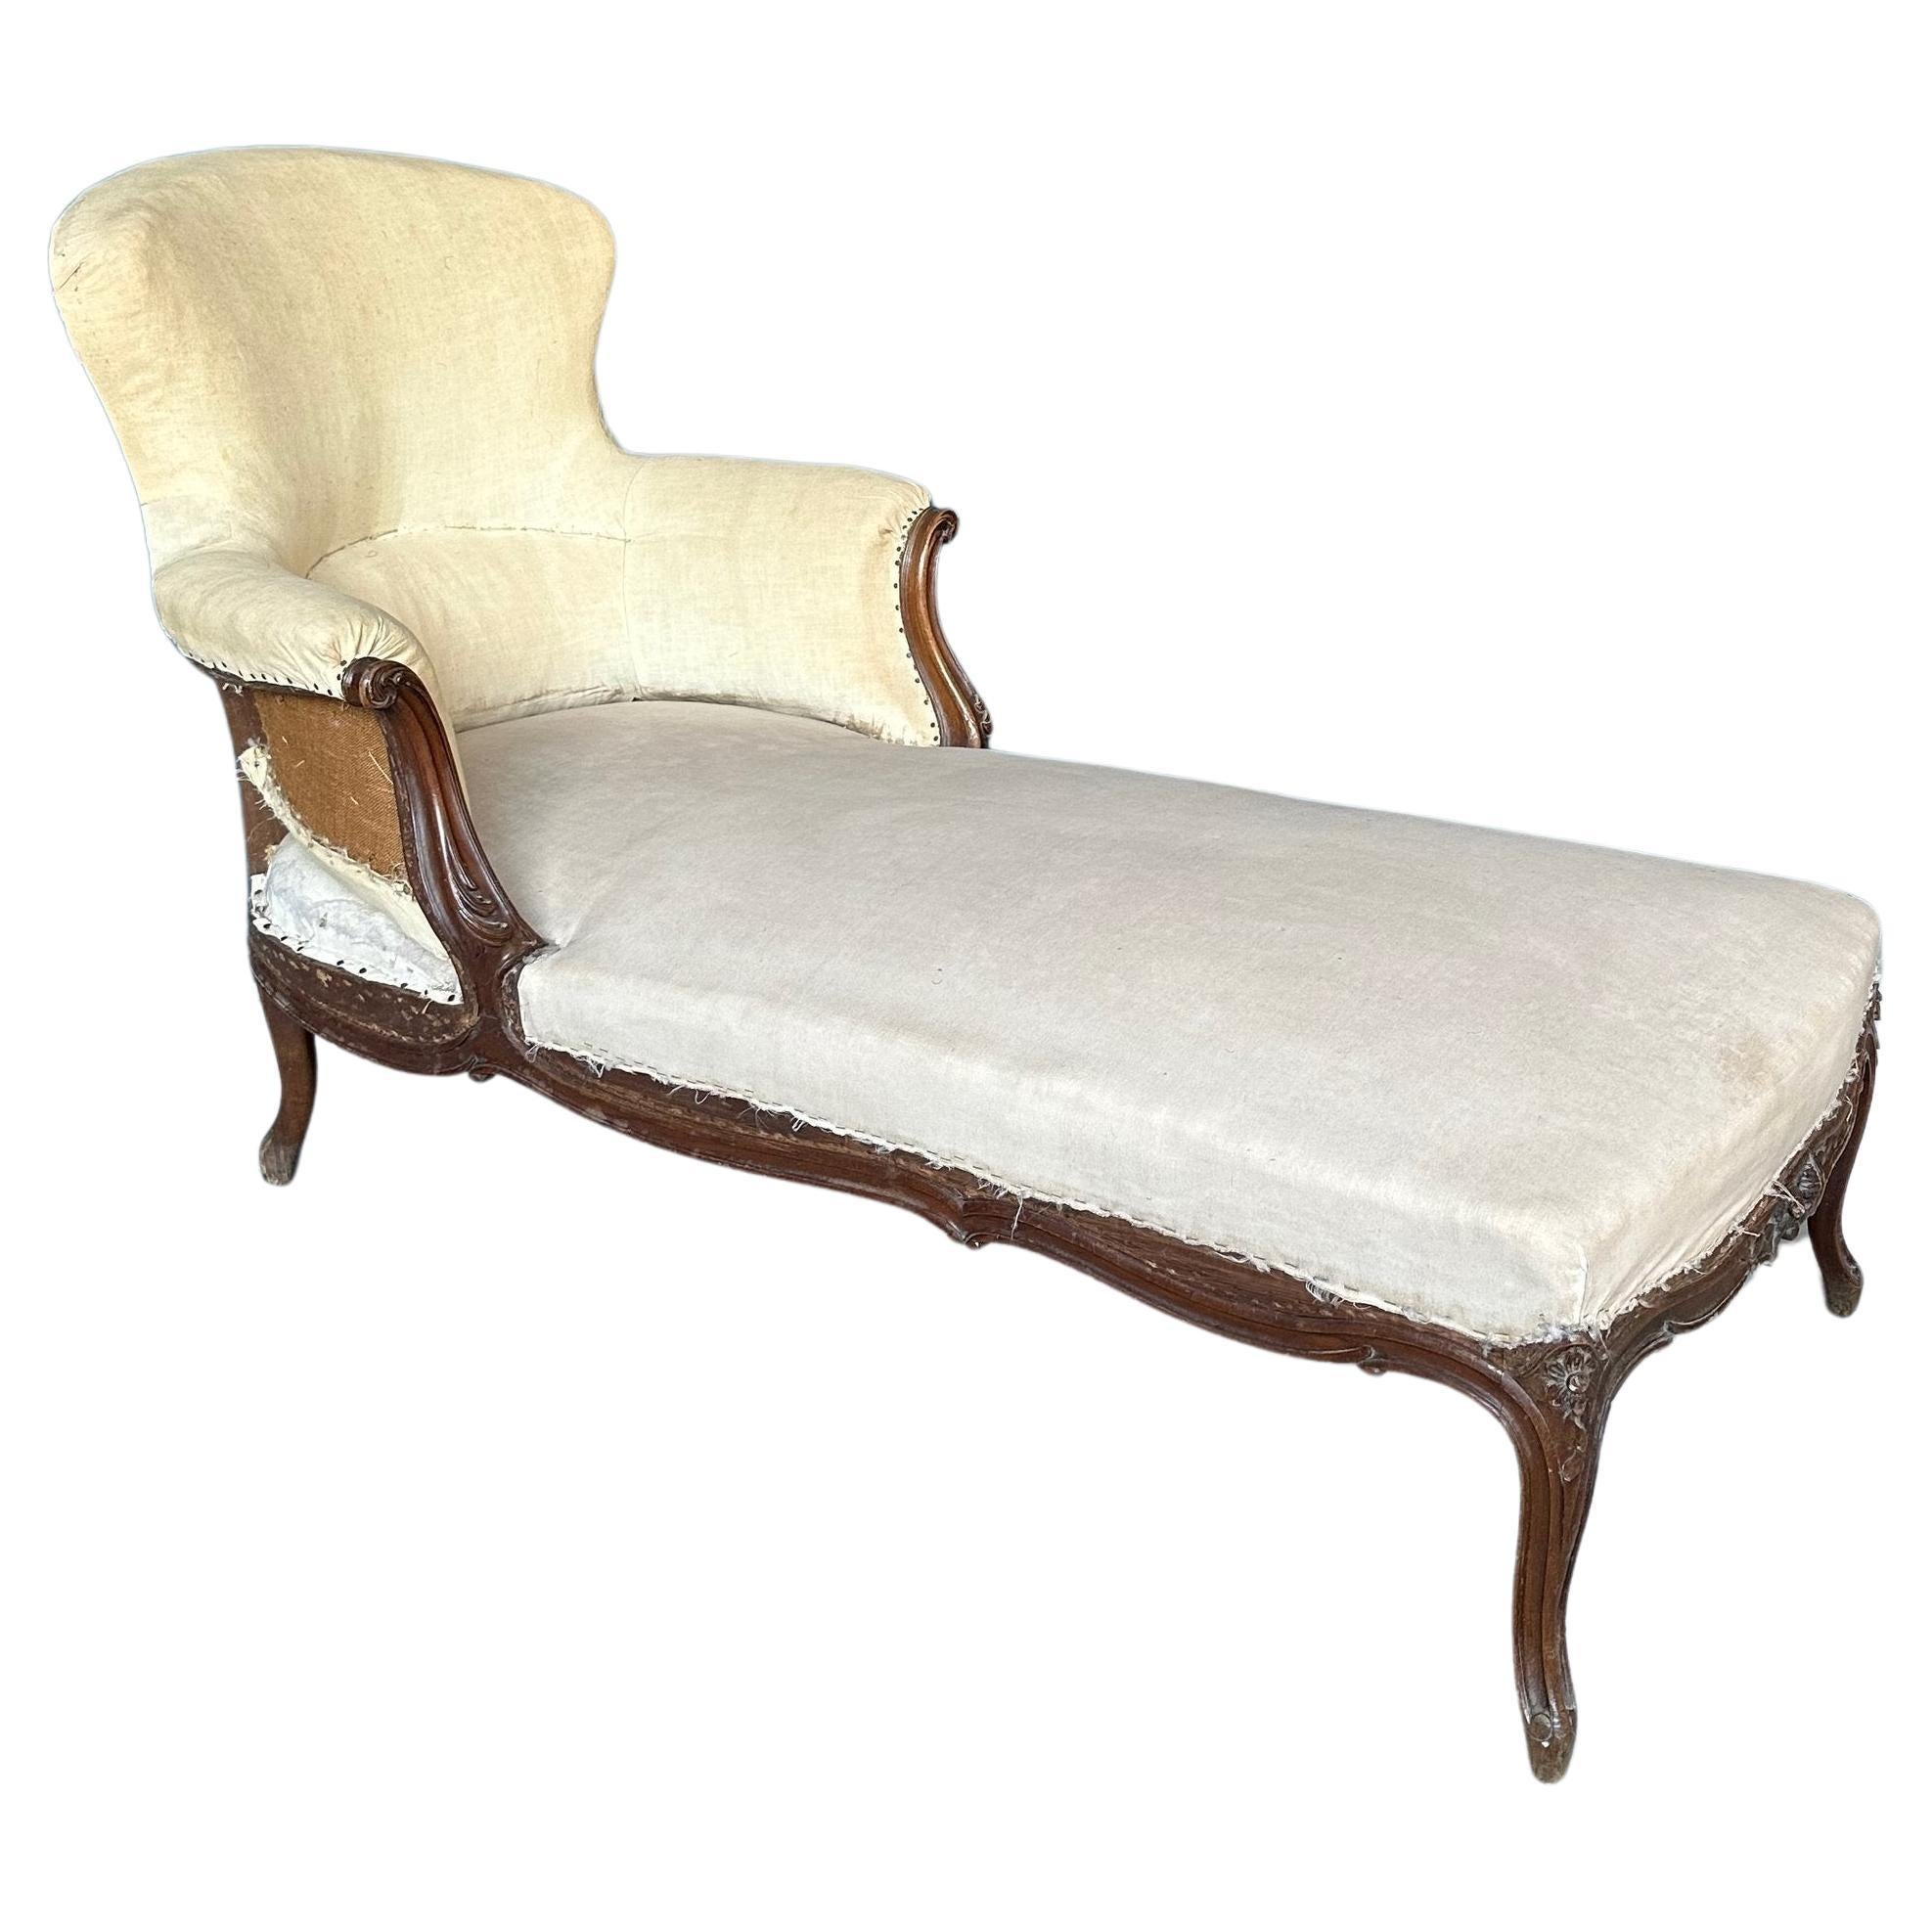 French 19th C. Chaise Longue with Carved Fruitwood Frame For Sale